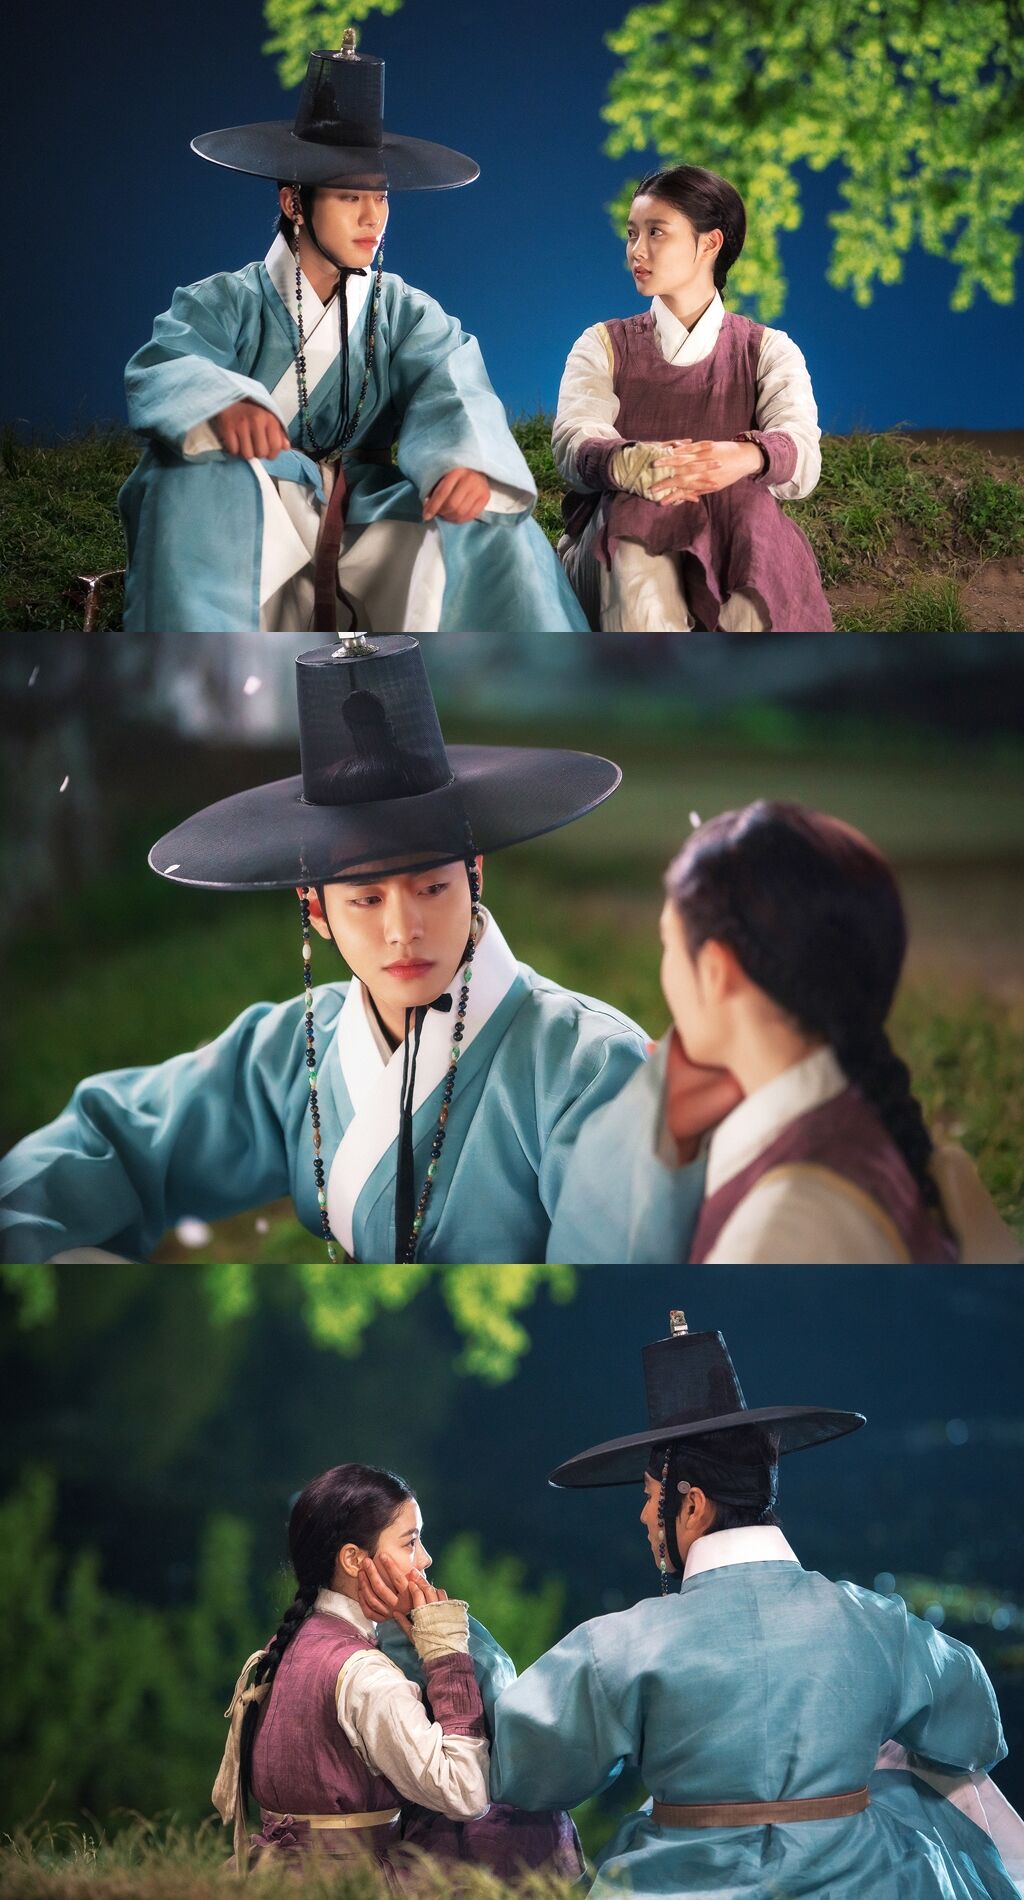 Ahn Hyo Seop And Kim Yoo Jung Share A Romantic Moment Under The Moonlight In “Lovers Of The Red Sky”